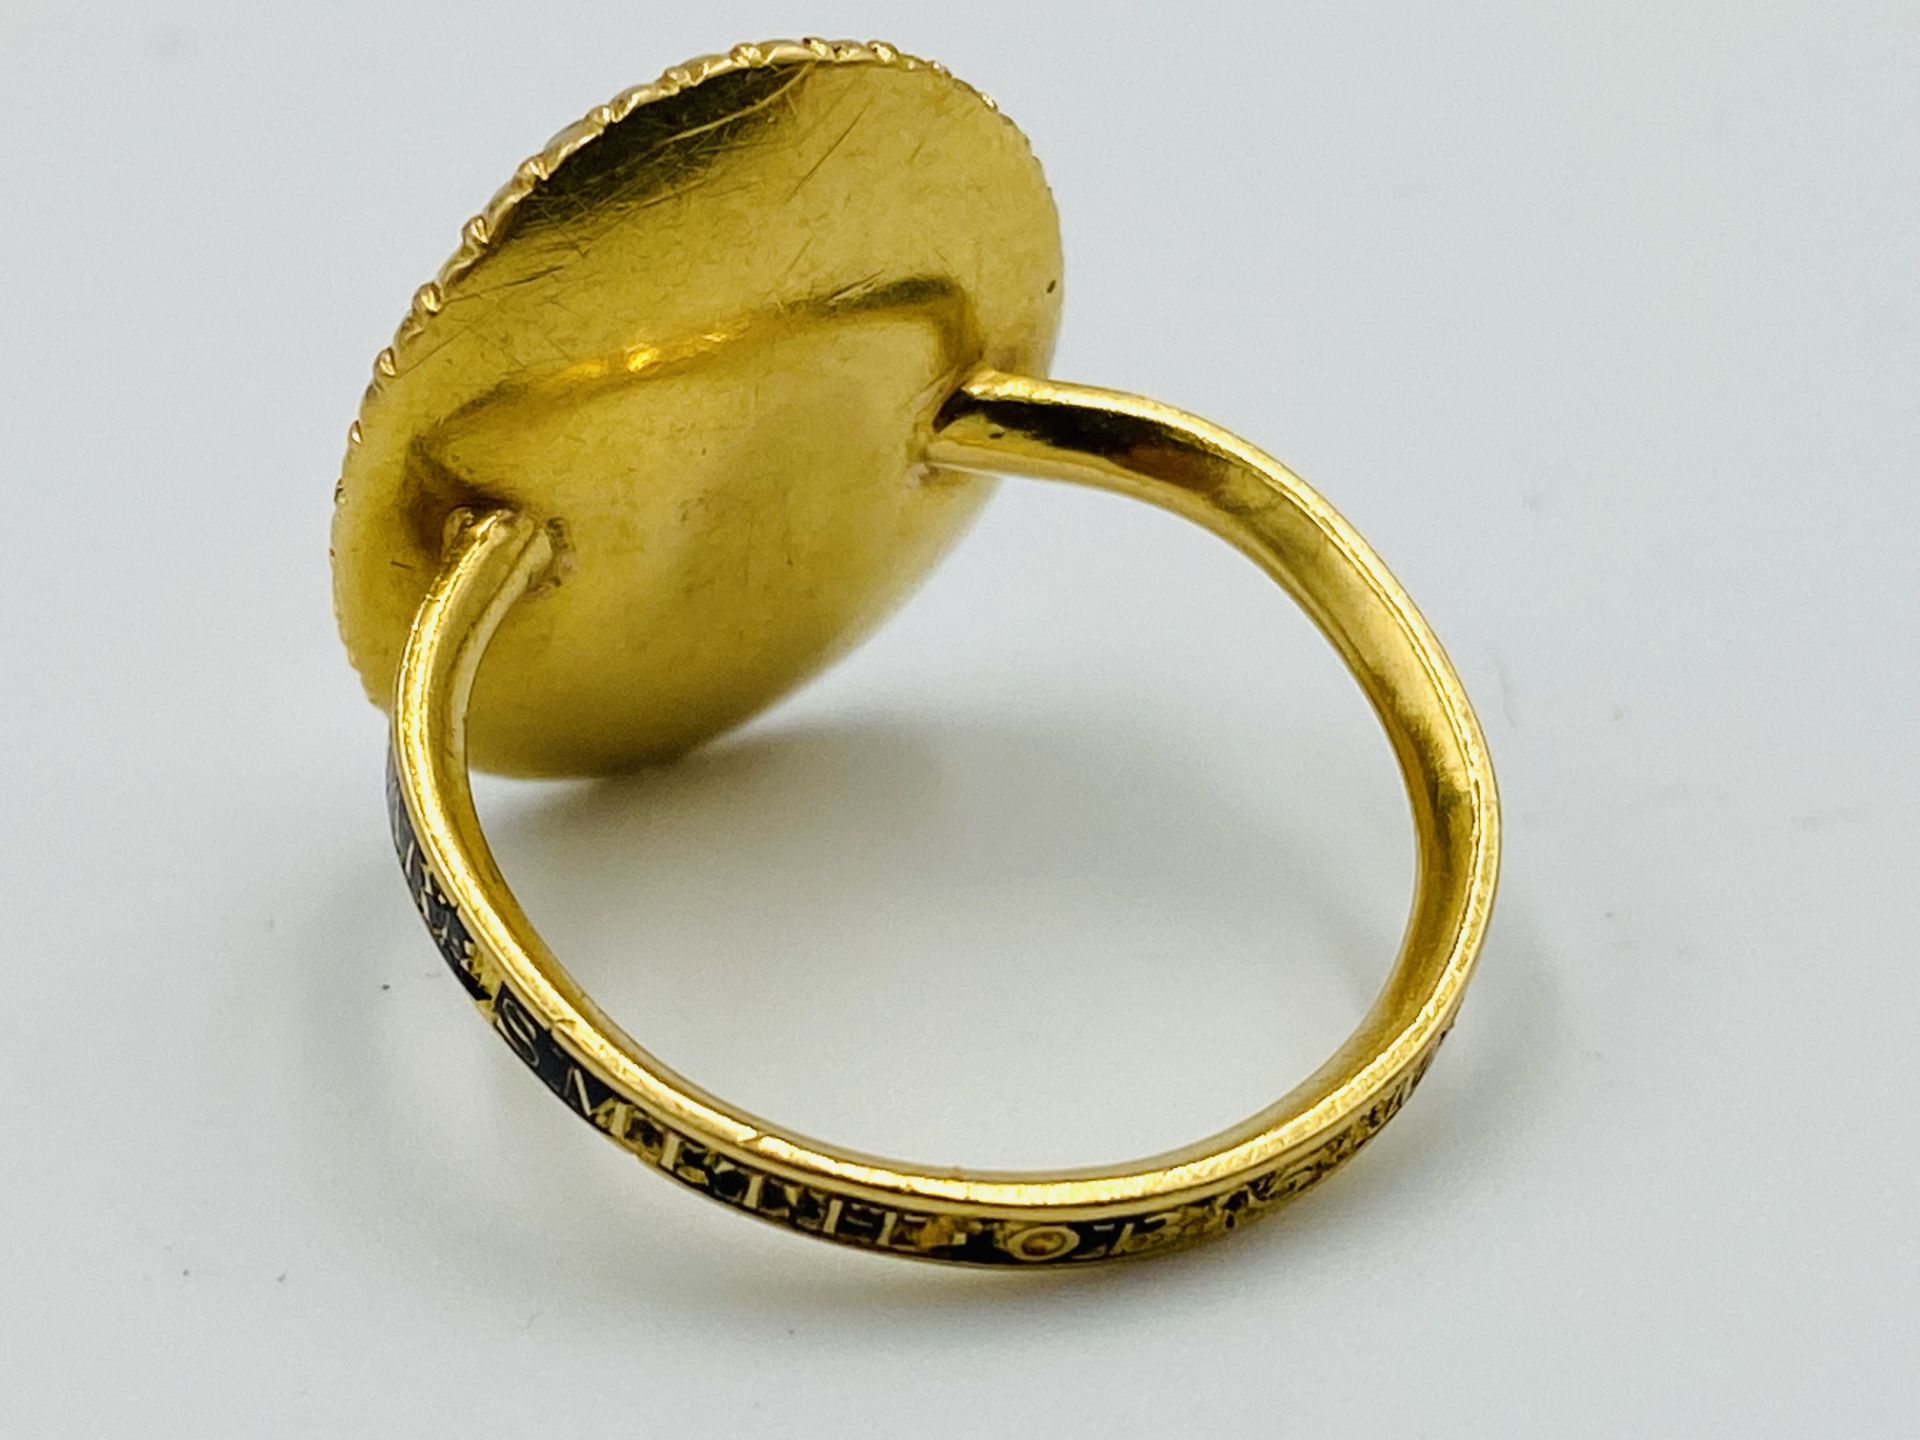 Gold mourning ring dated 1852 - Image 3 of 5